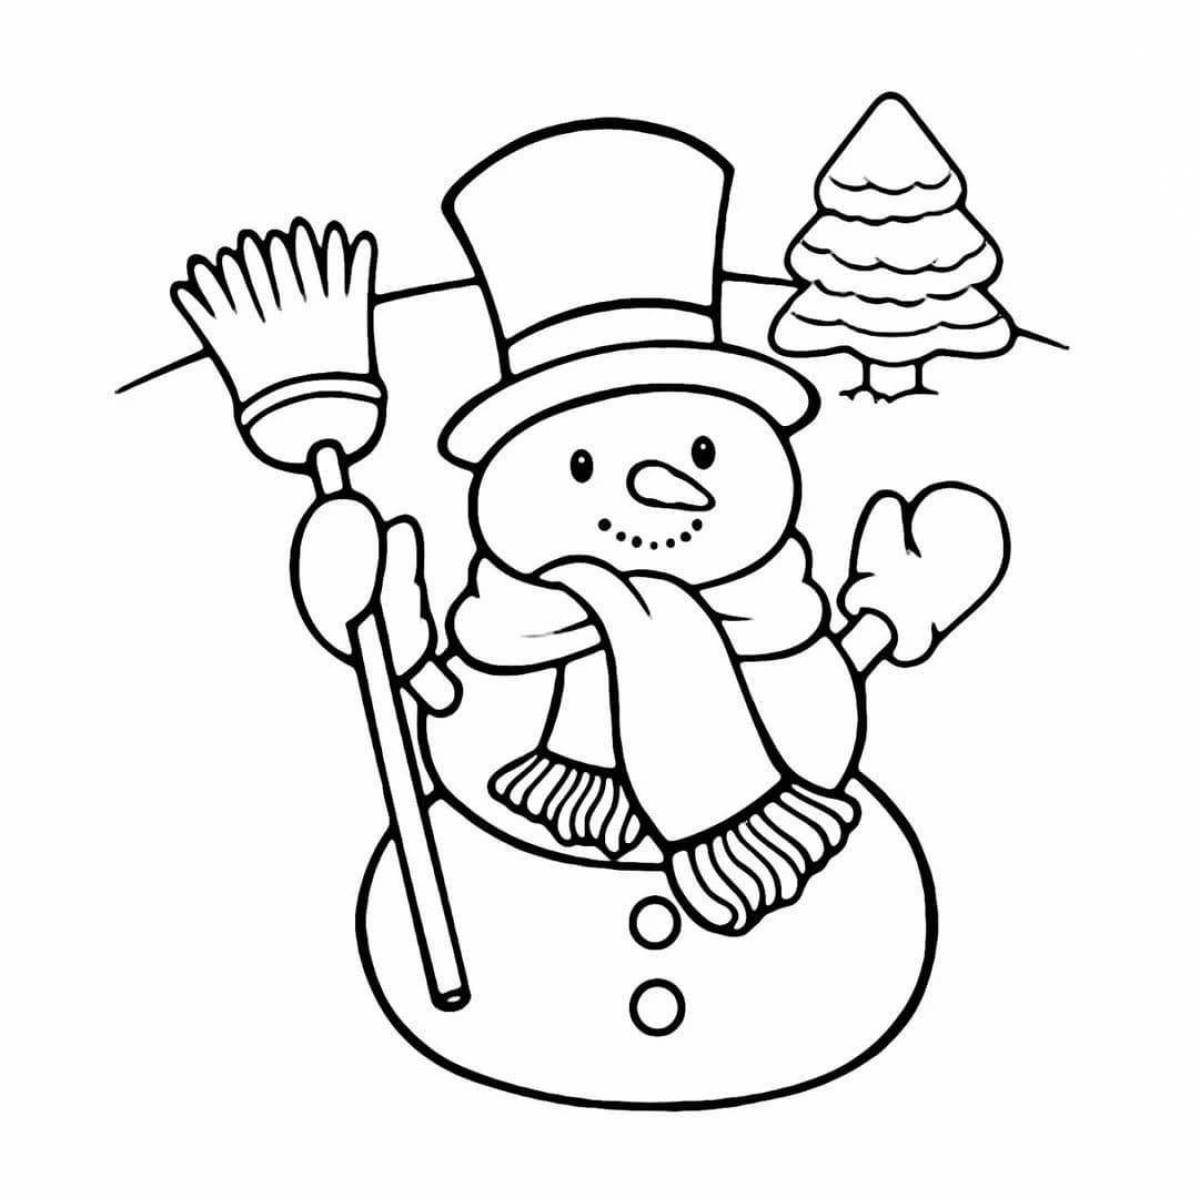 Amazing snowman coloring pages